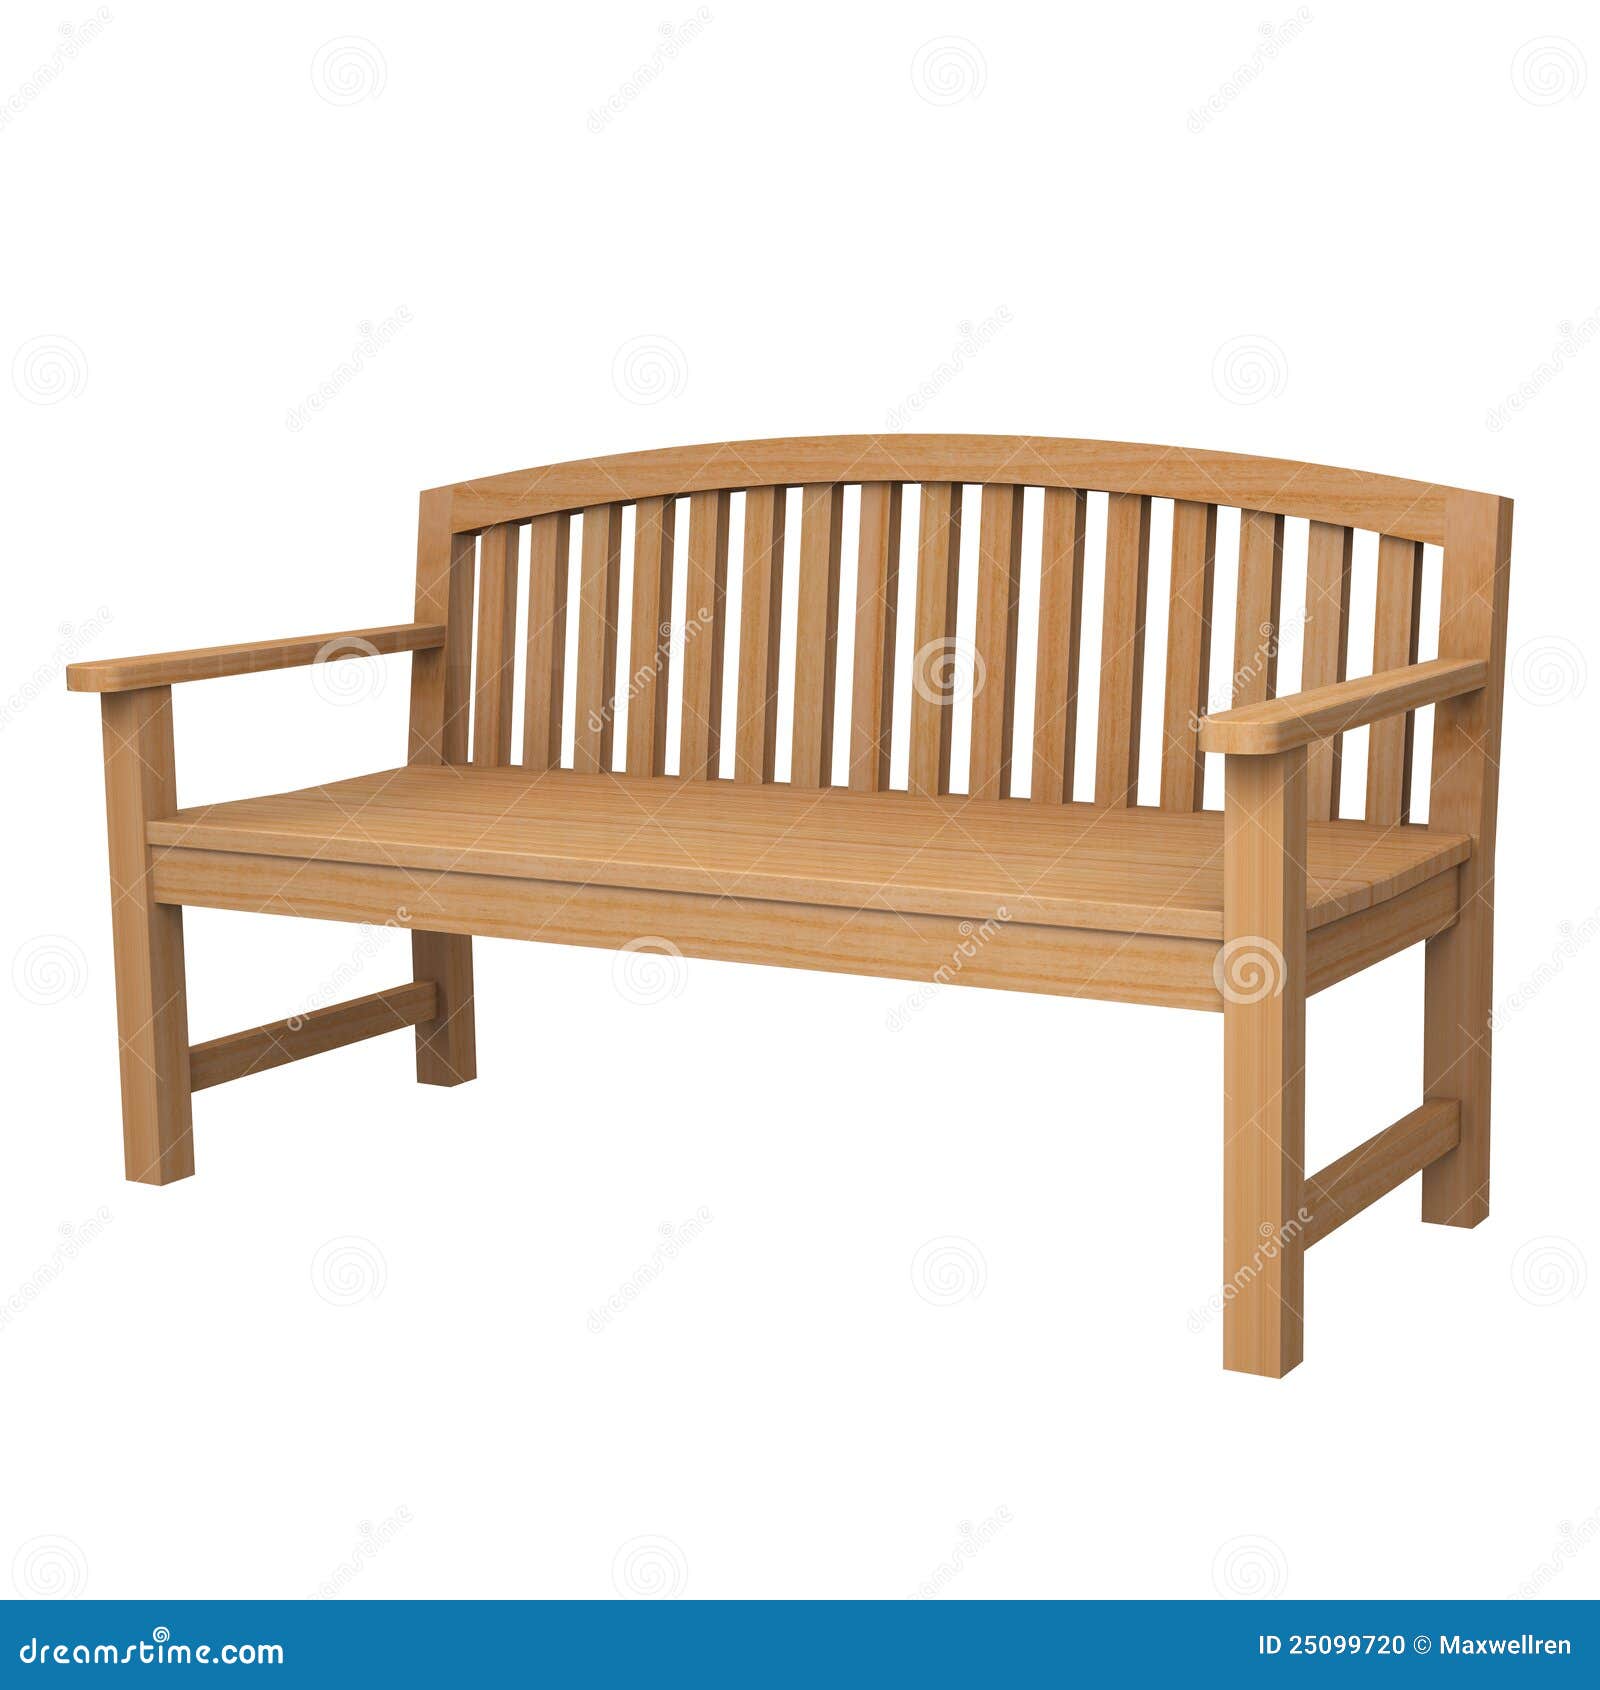 A Wooden Bench On White Stock Photo - Image: 25099720